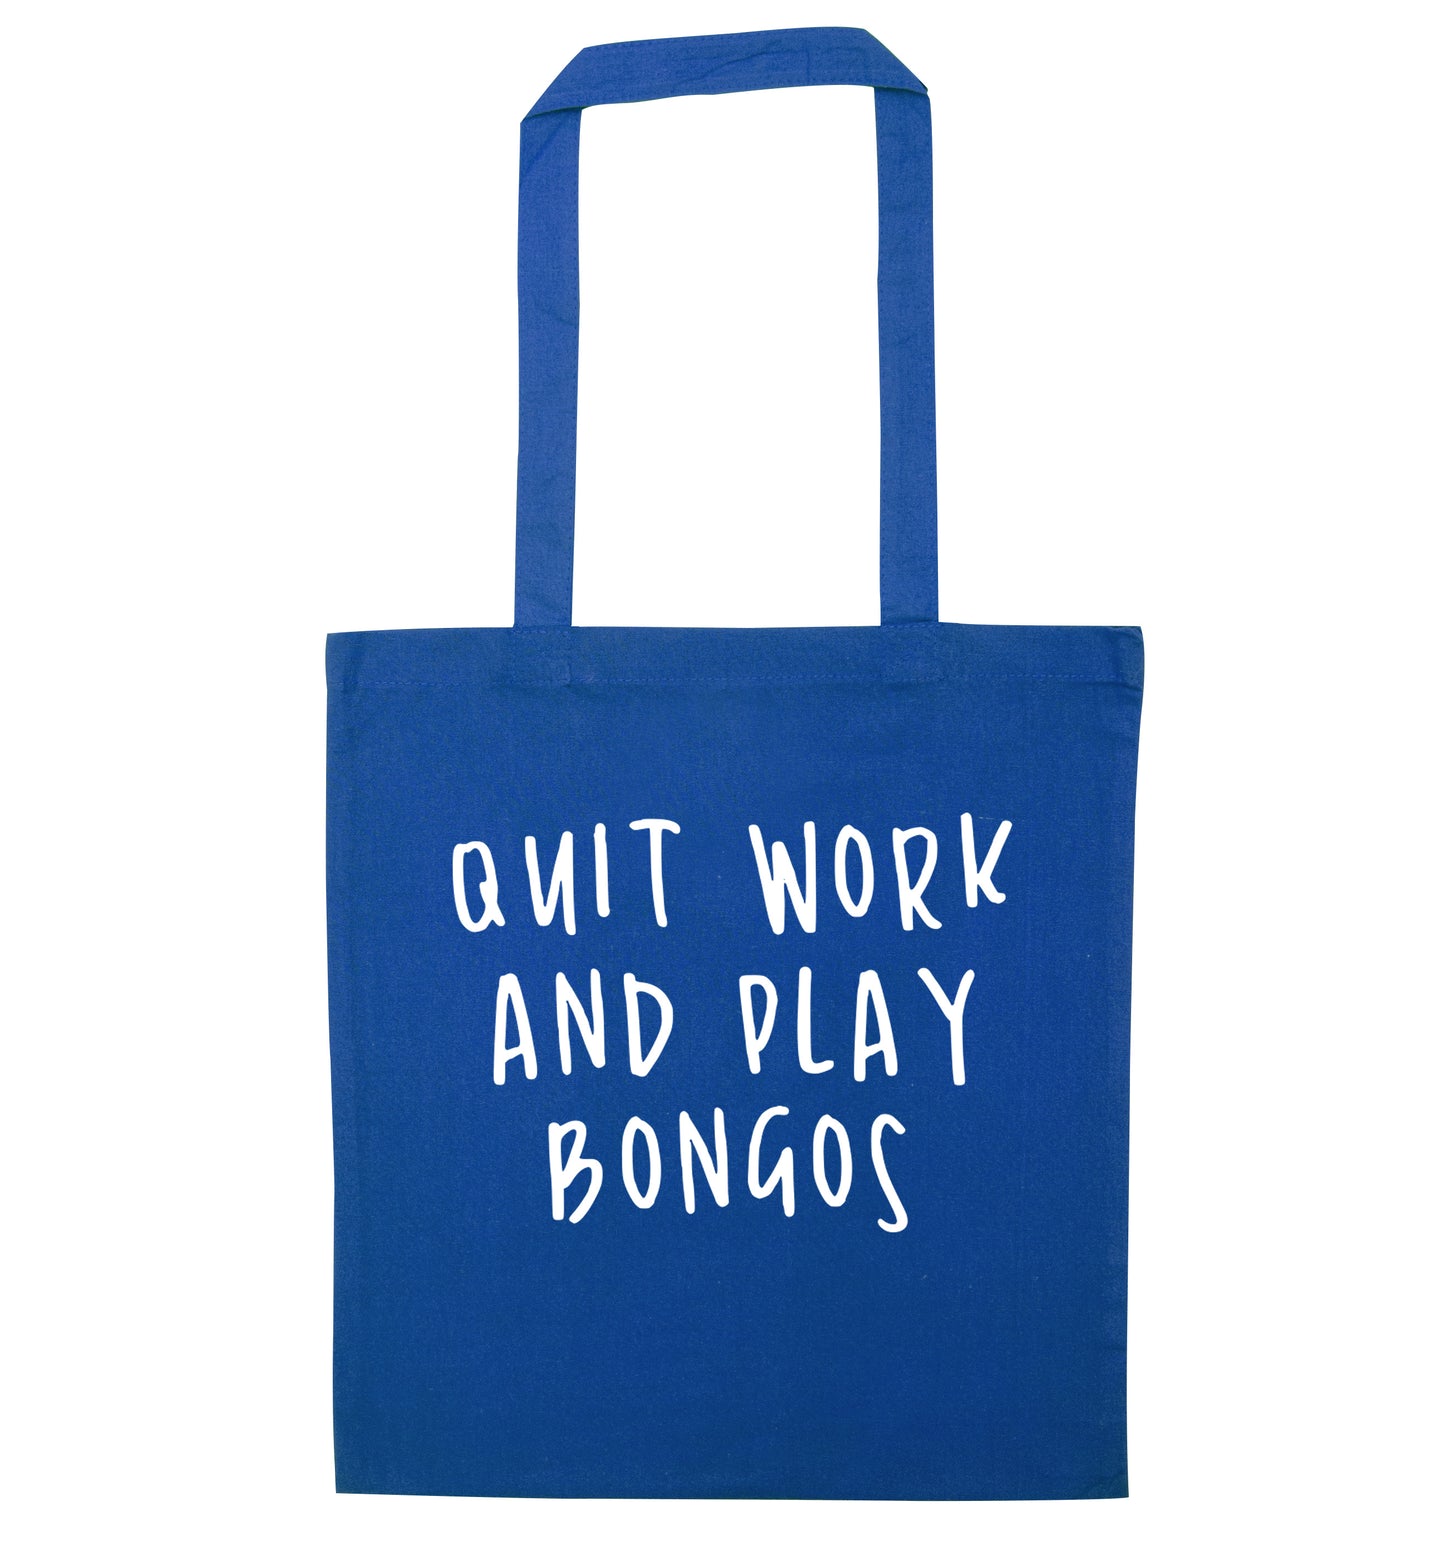 Quit work and play bongos blue tote bag